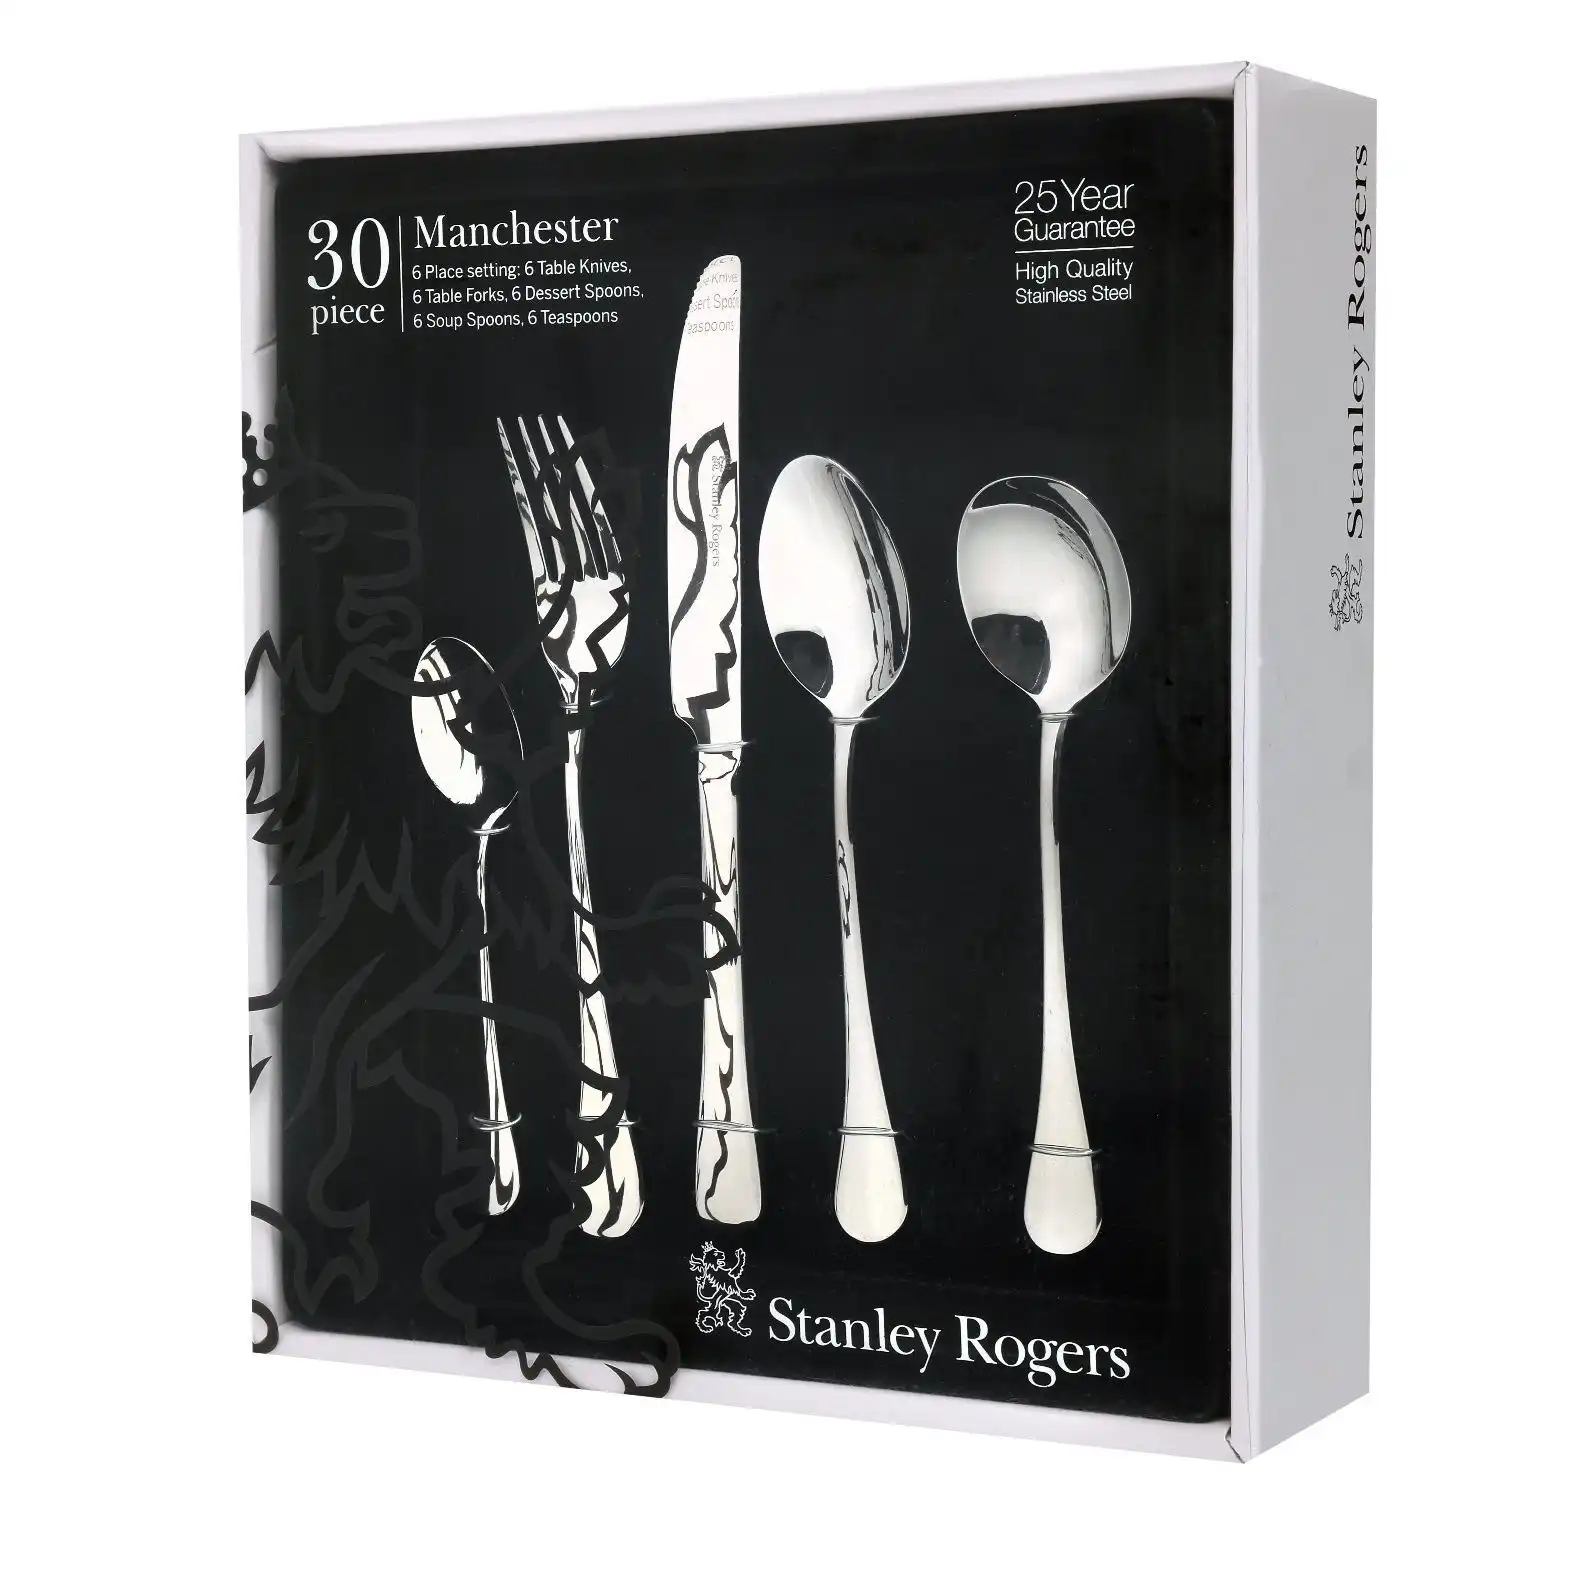 Stanley Rogers 30 Piece Manchester Cutlery Gift Boxed Set